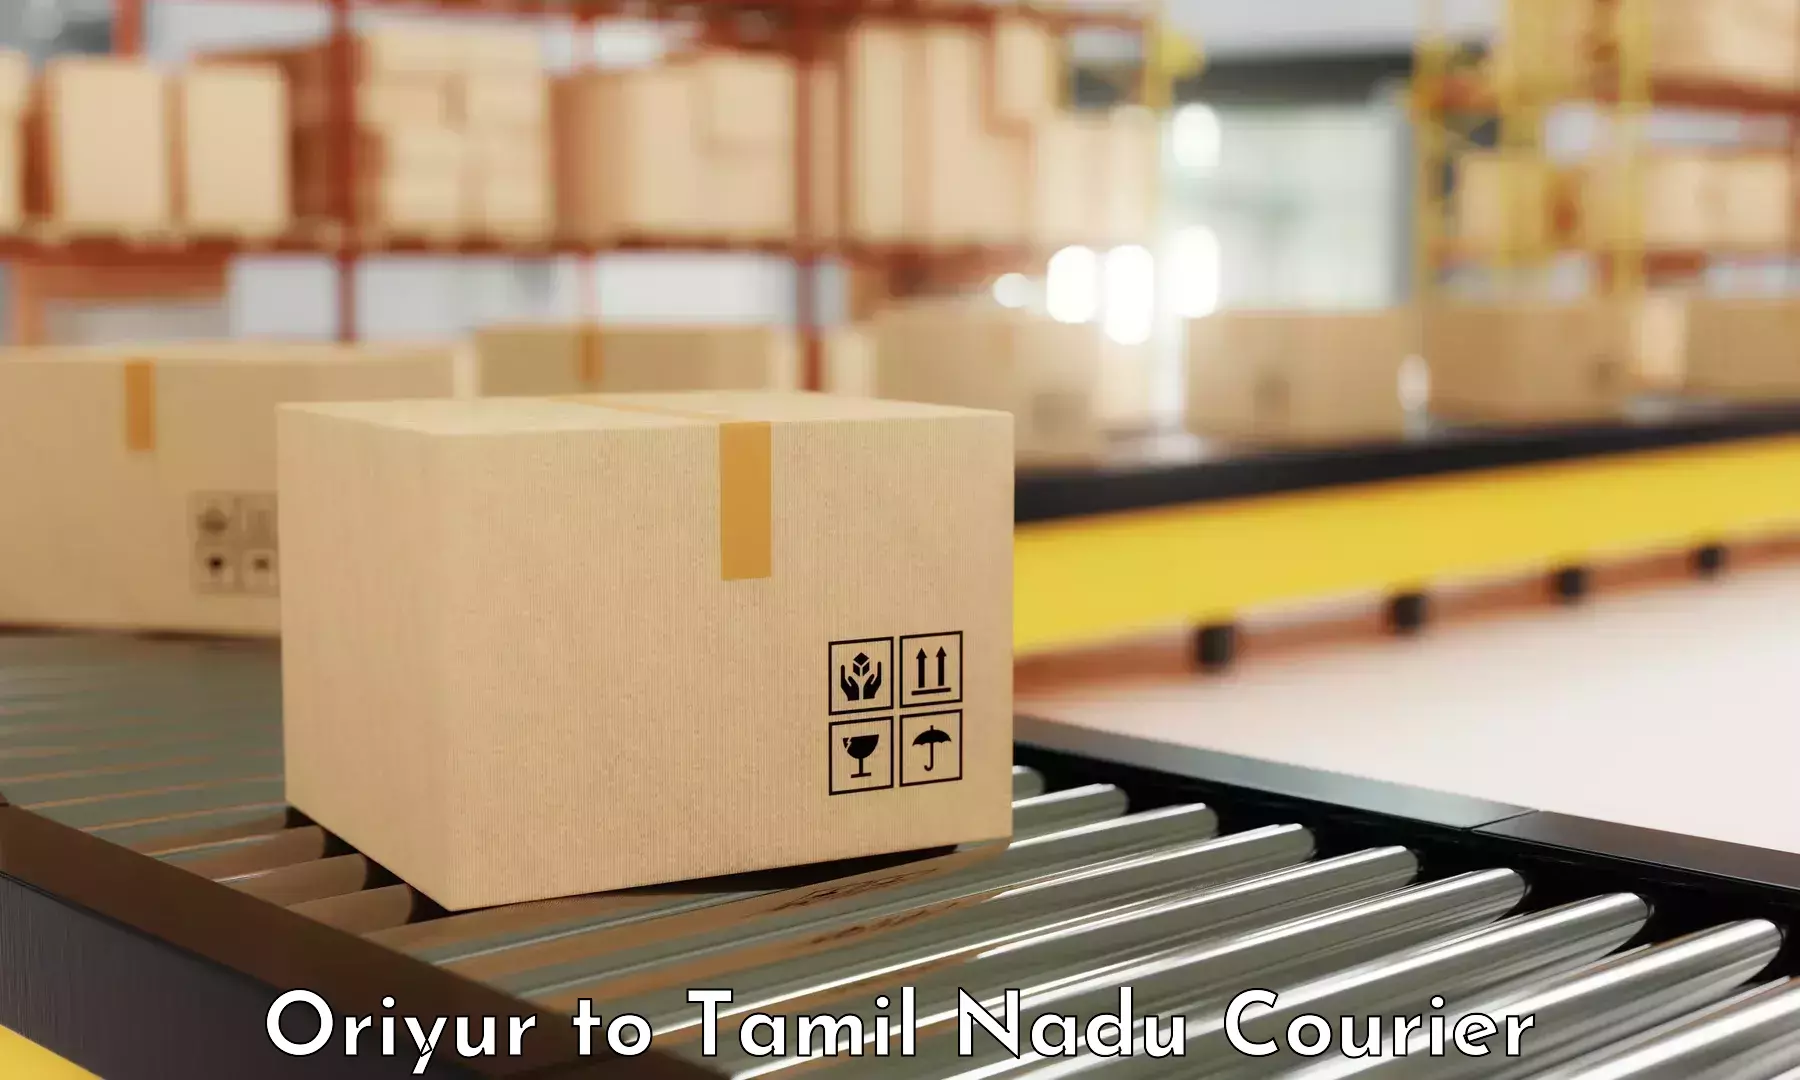 24-hour courier service Oriyur to Avadi